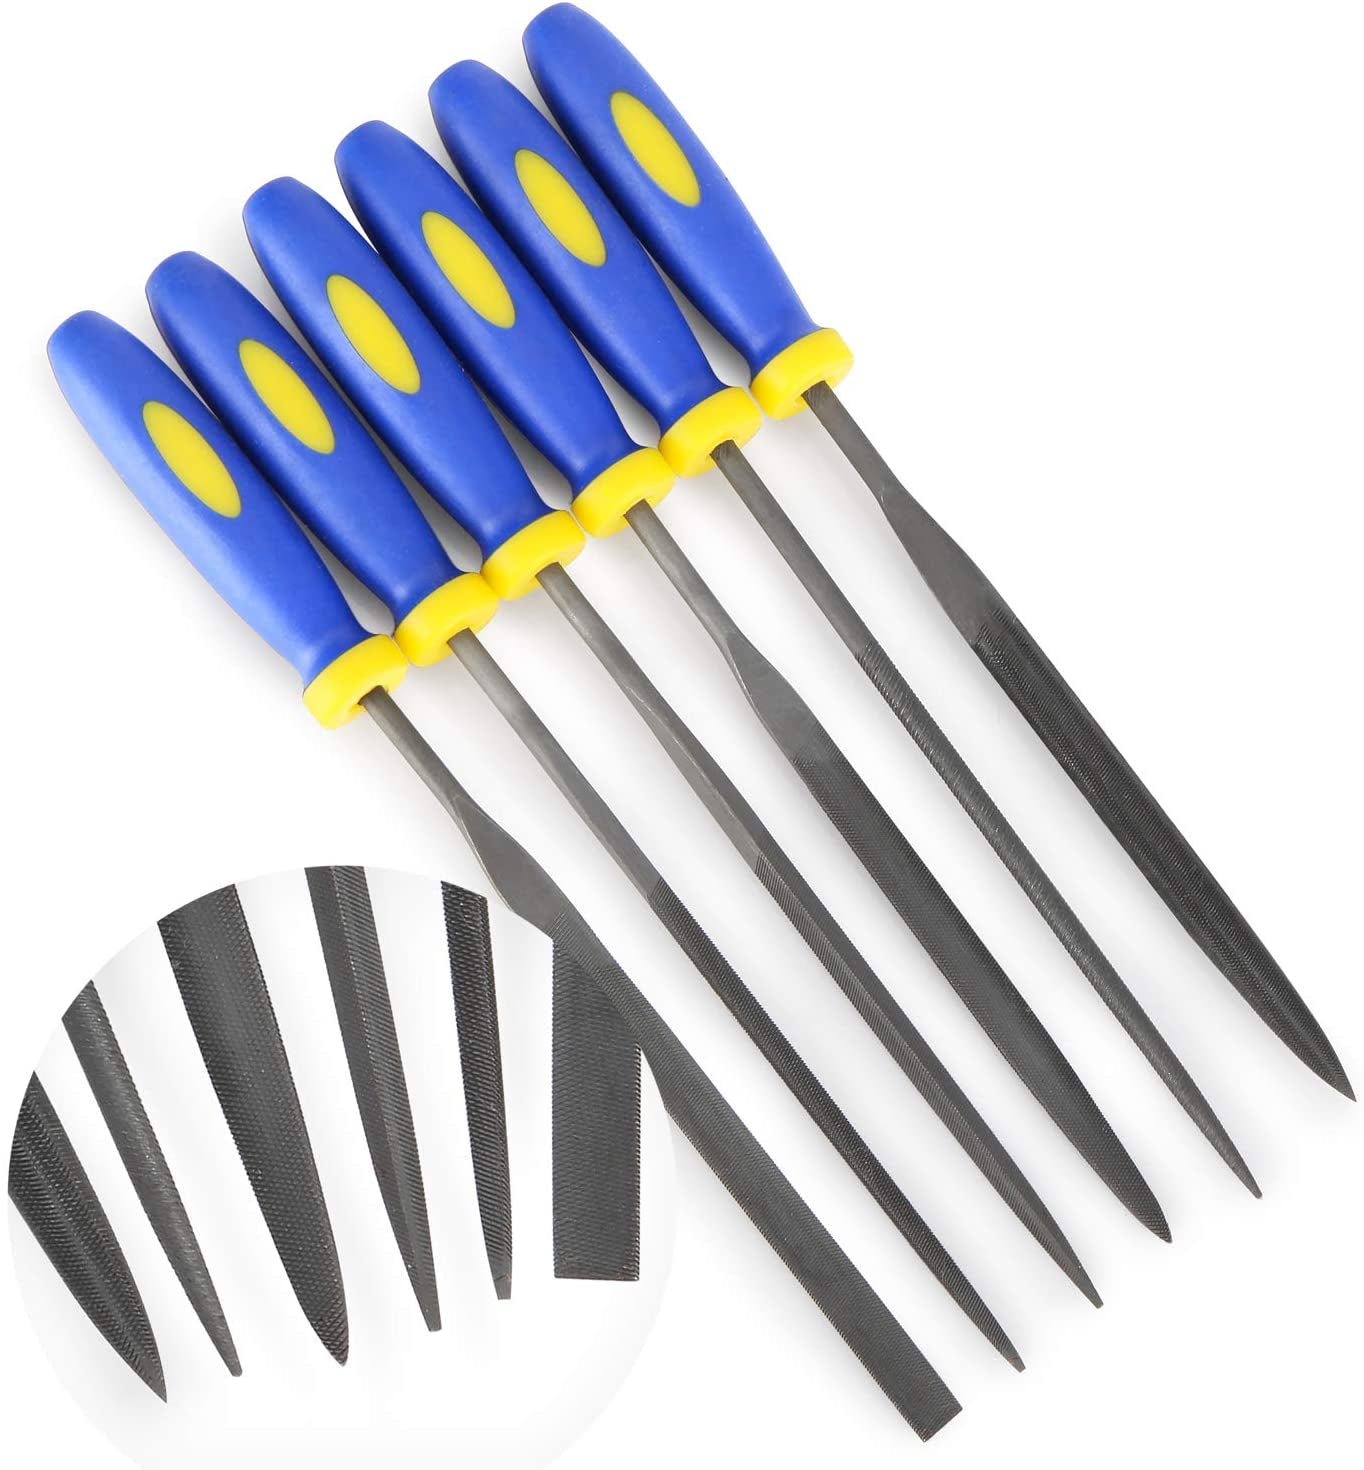 KALIM, MINI Needle File Set (Carbon Steel 6 Piece-Set) Hardened Alloy Strength Steel - Set Includes Flat, Flat Warding, Square, Triangular, Round, and Half-Round File(6'' Total Length)